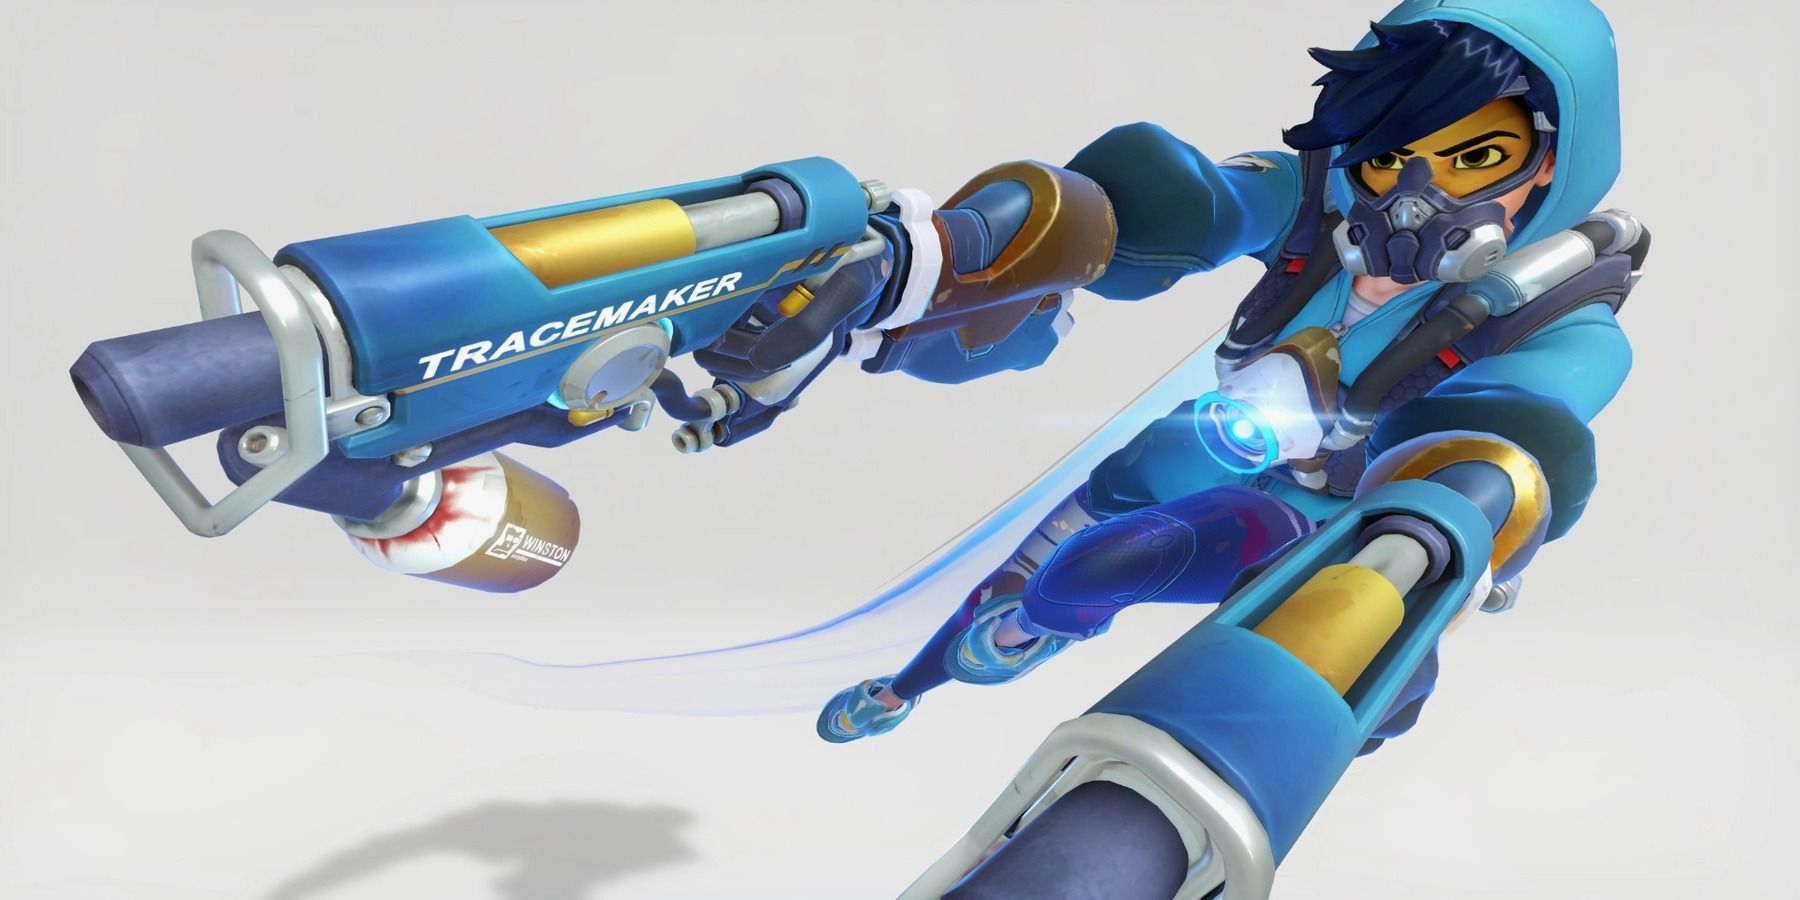 Funny Overwatch clip shows Tracer dodging Hanzo's arrows with an emote